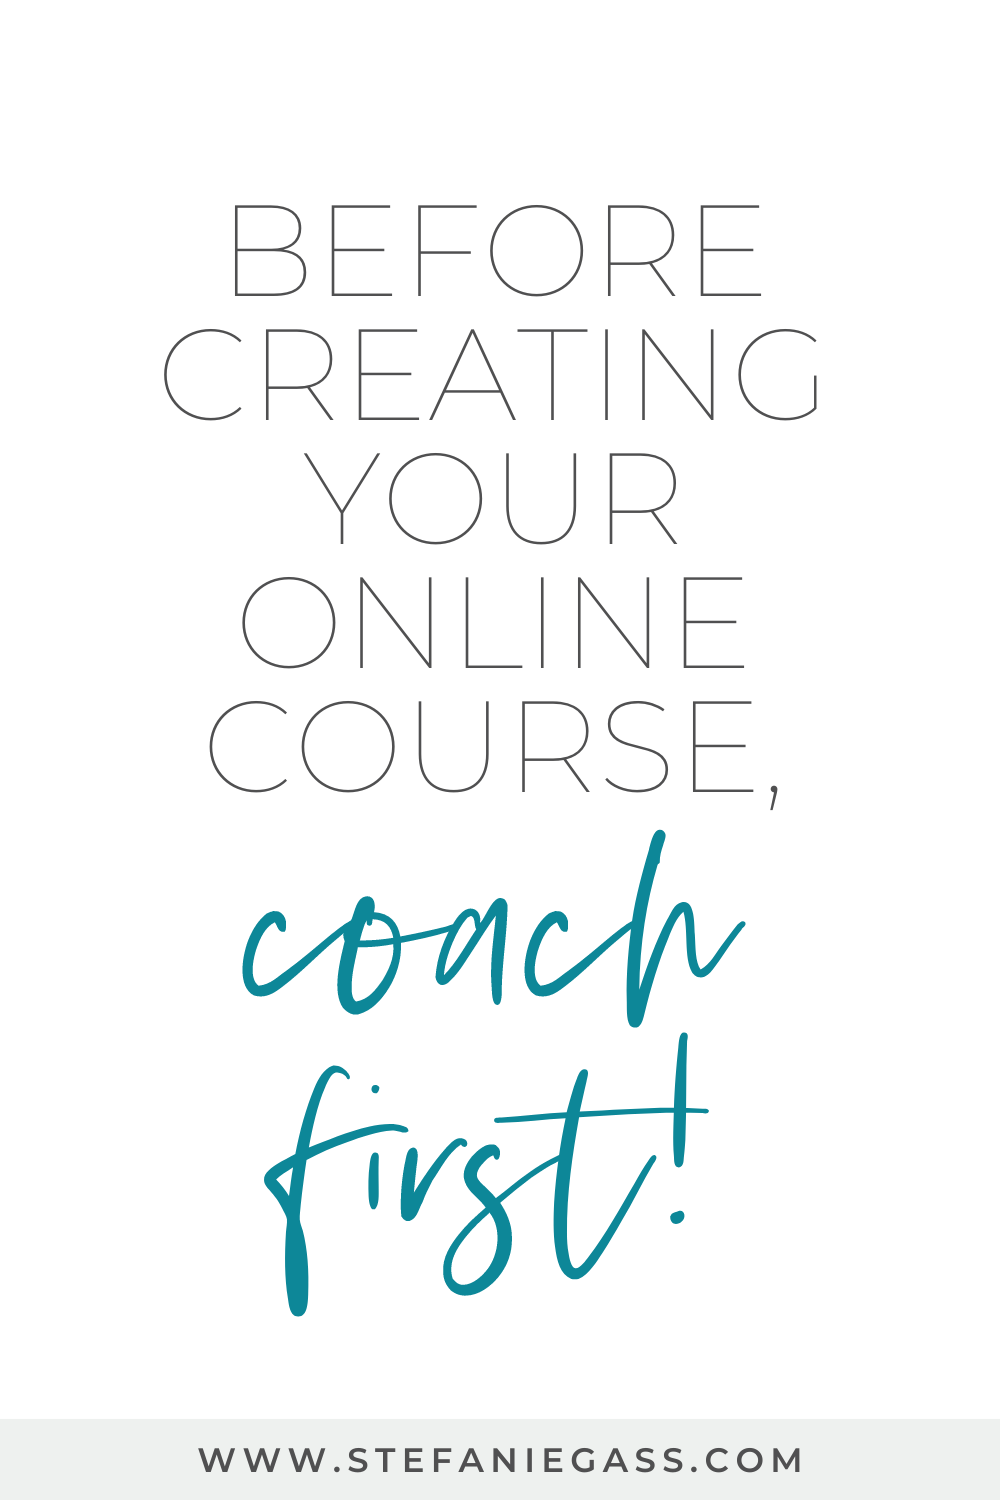 Text Reads:  Before creating your online course, coach first!  Stefanie Gass.com 